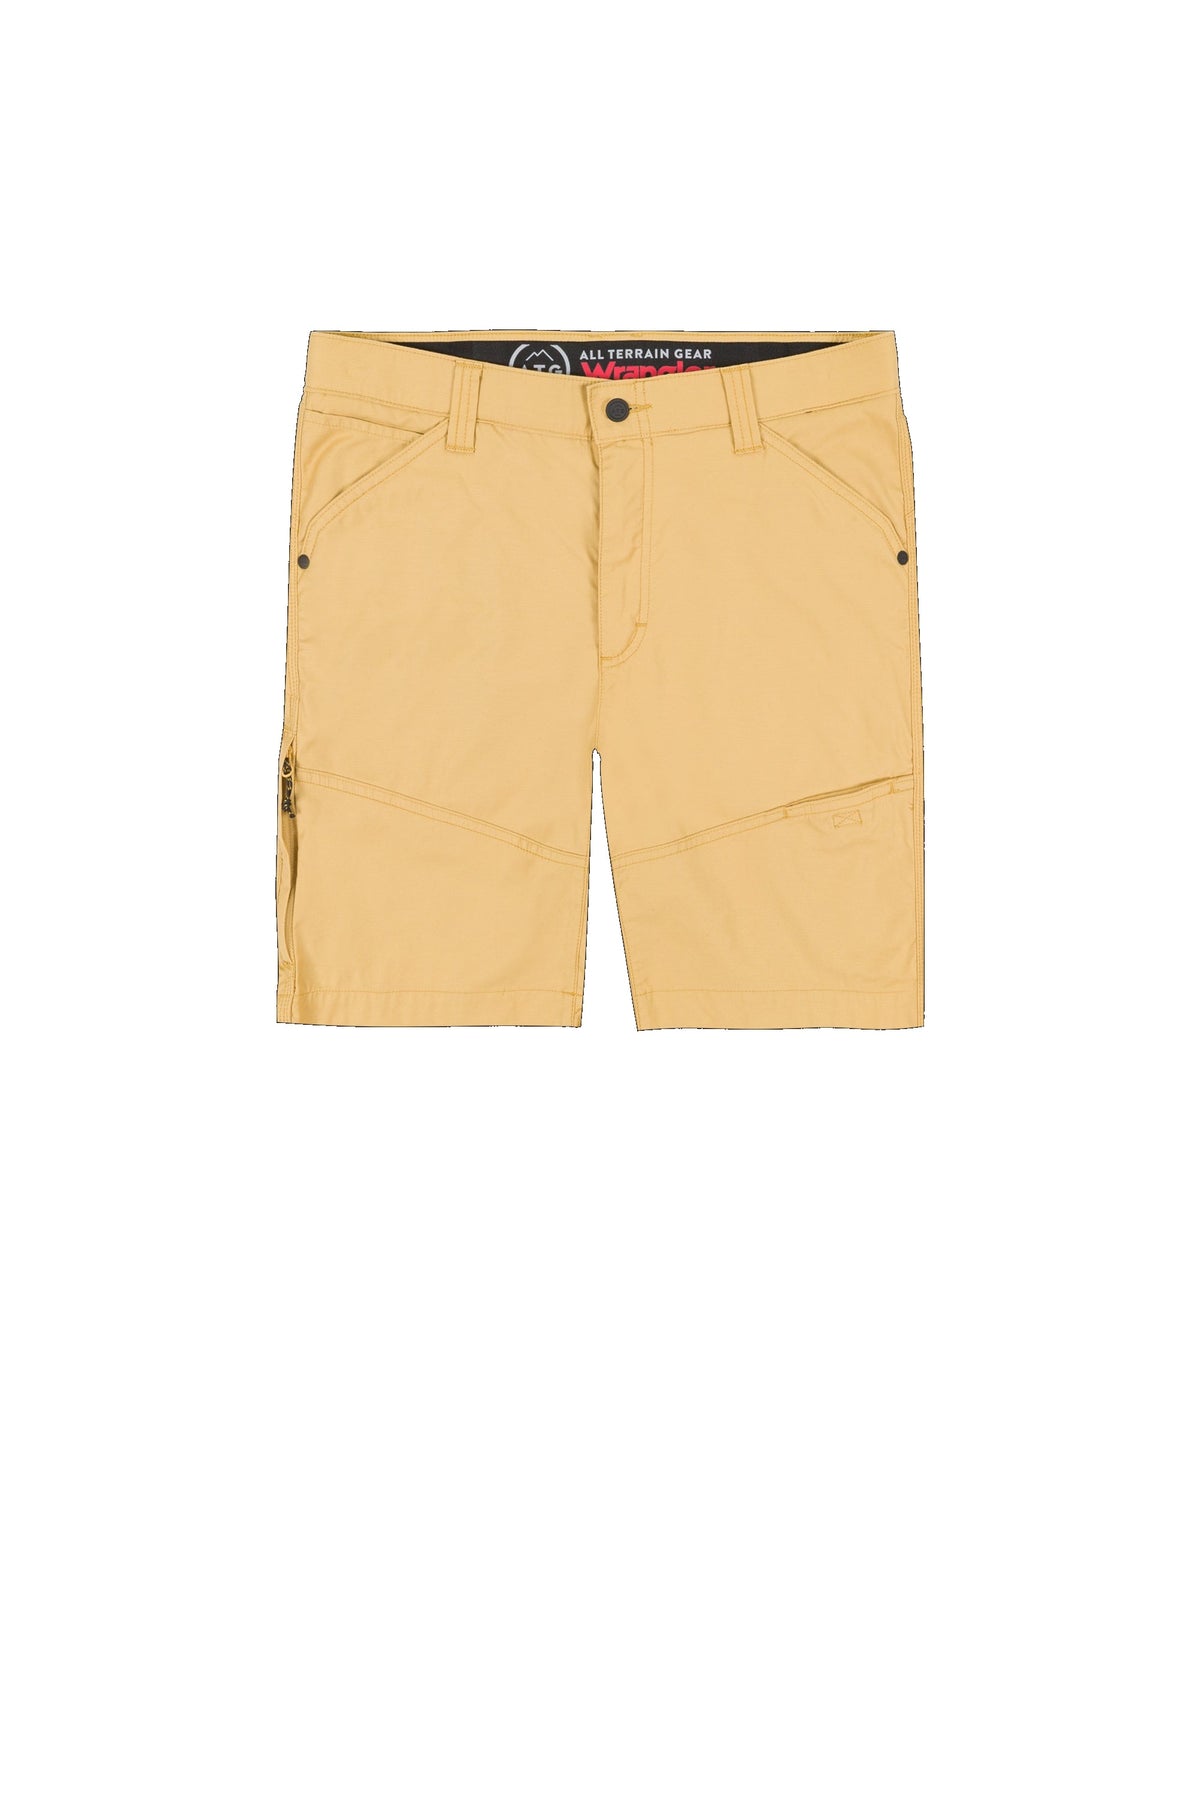 Rugged Trail Short in Antelope